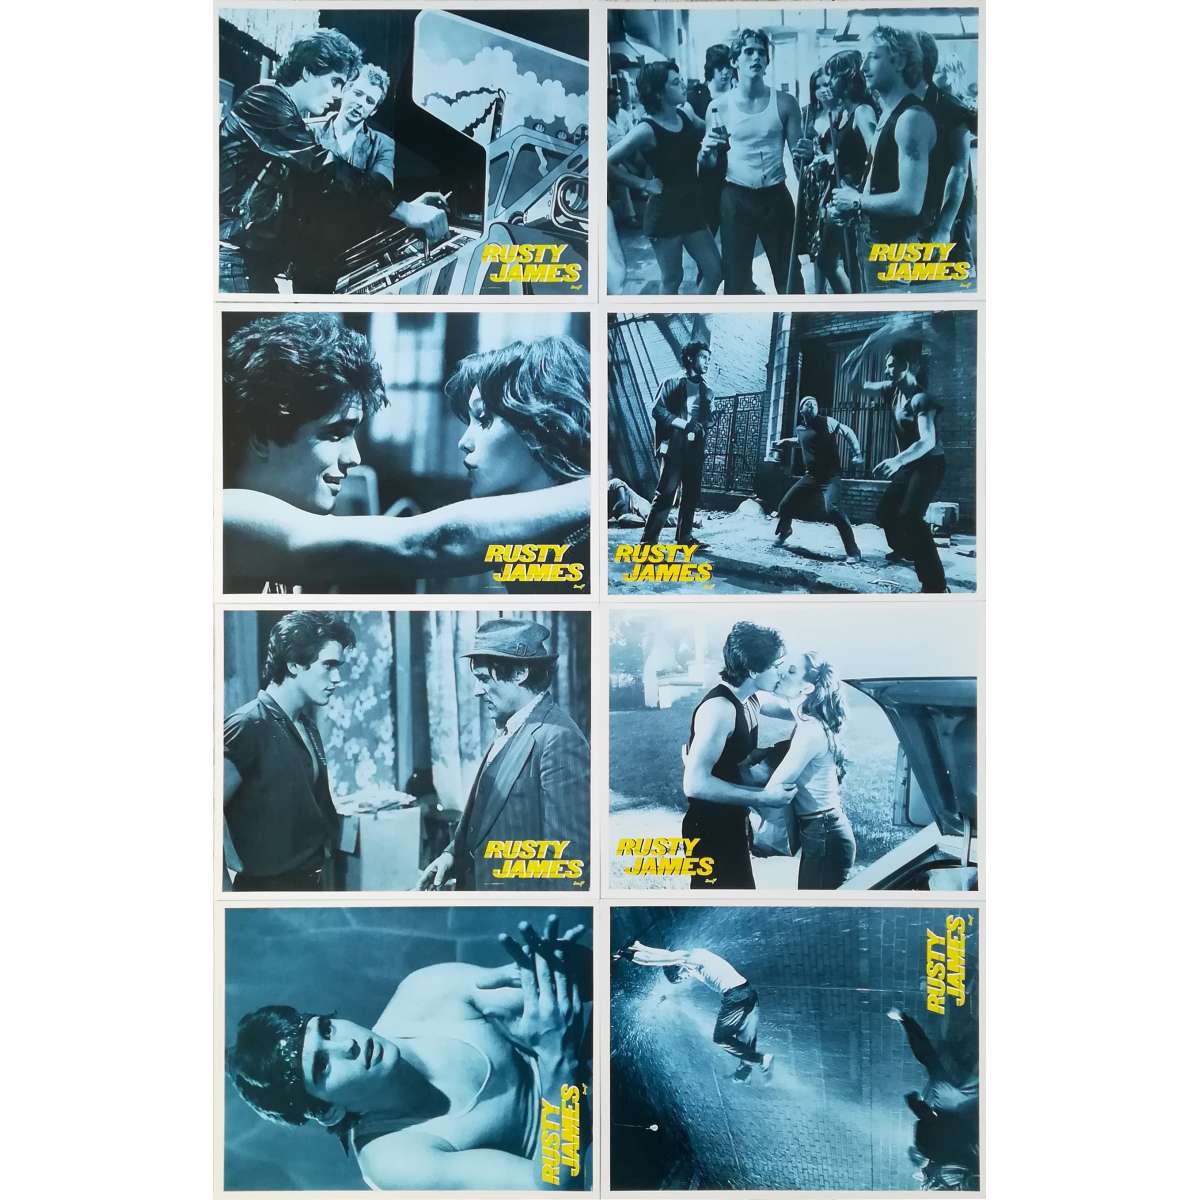 RUMBLE FISH Lobby Cards 9x12 in.